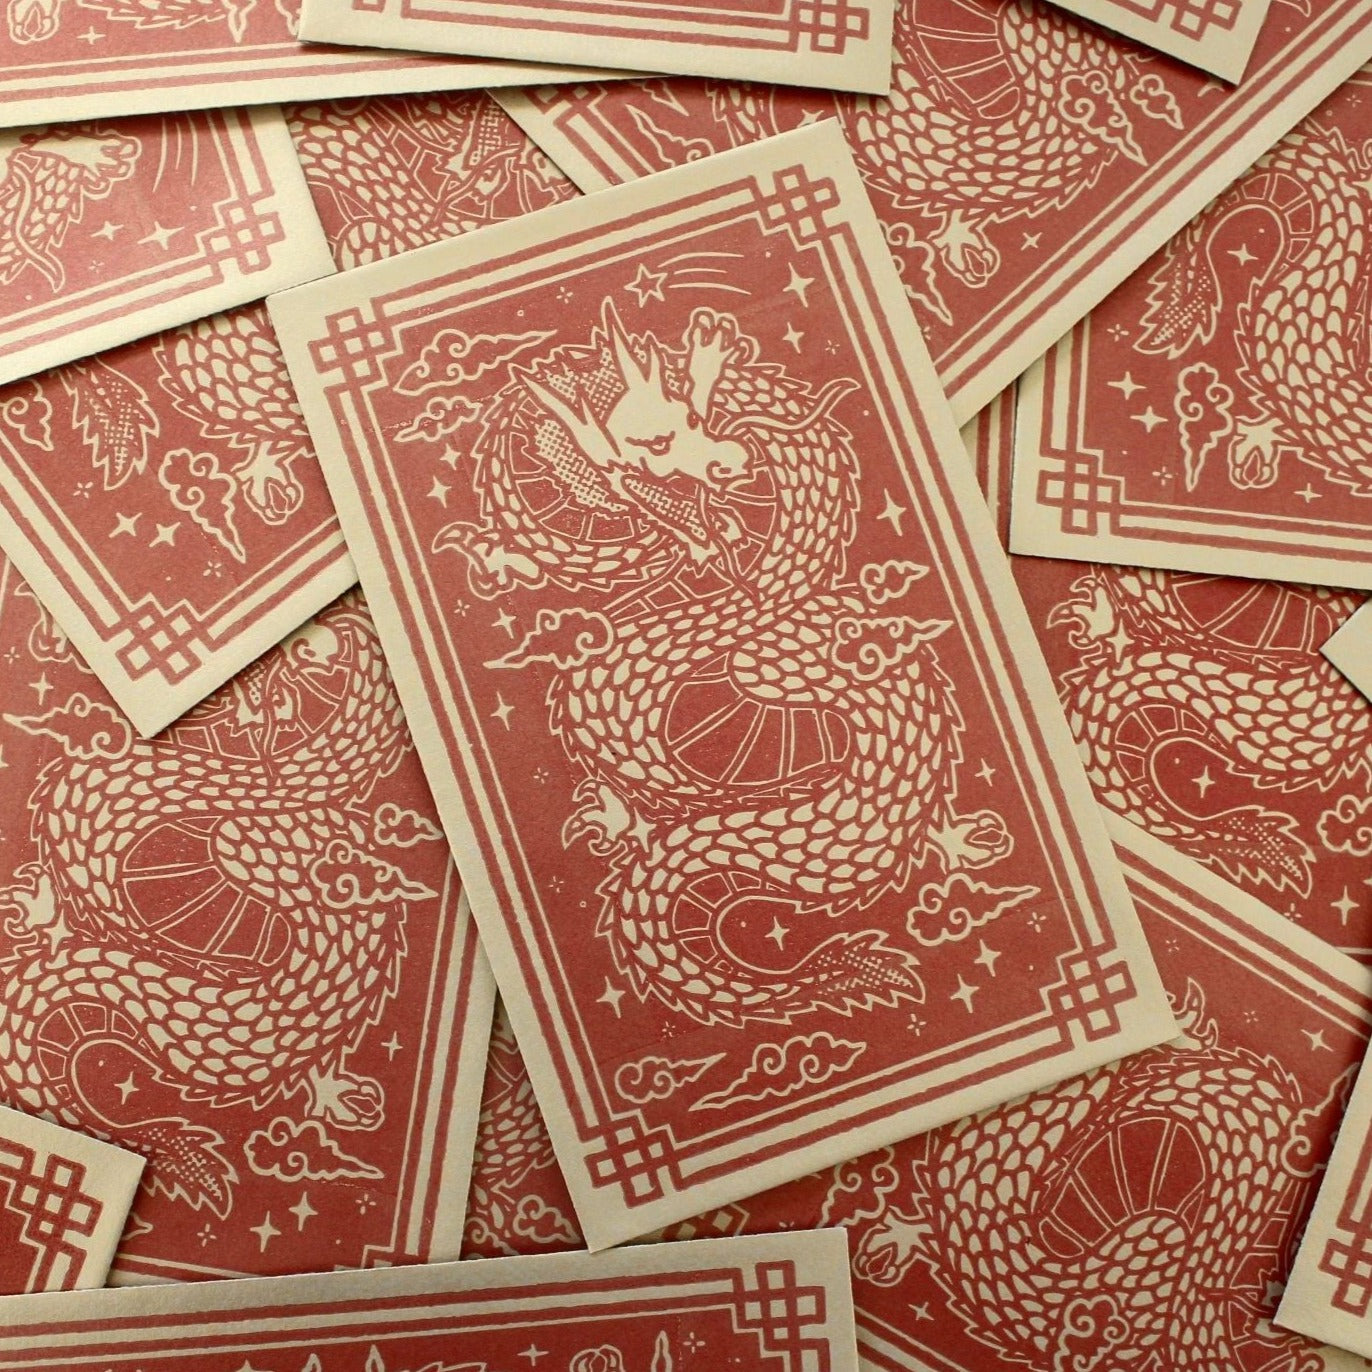 A lot of Year of the Dragon Red Envelope scattered